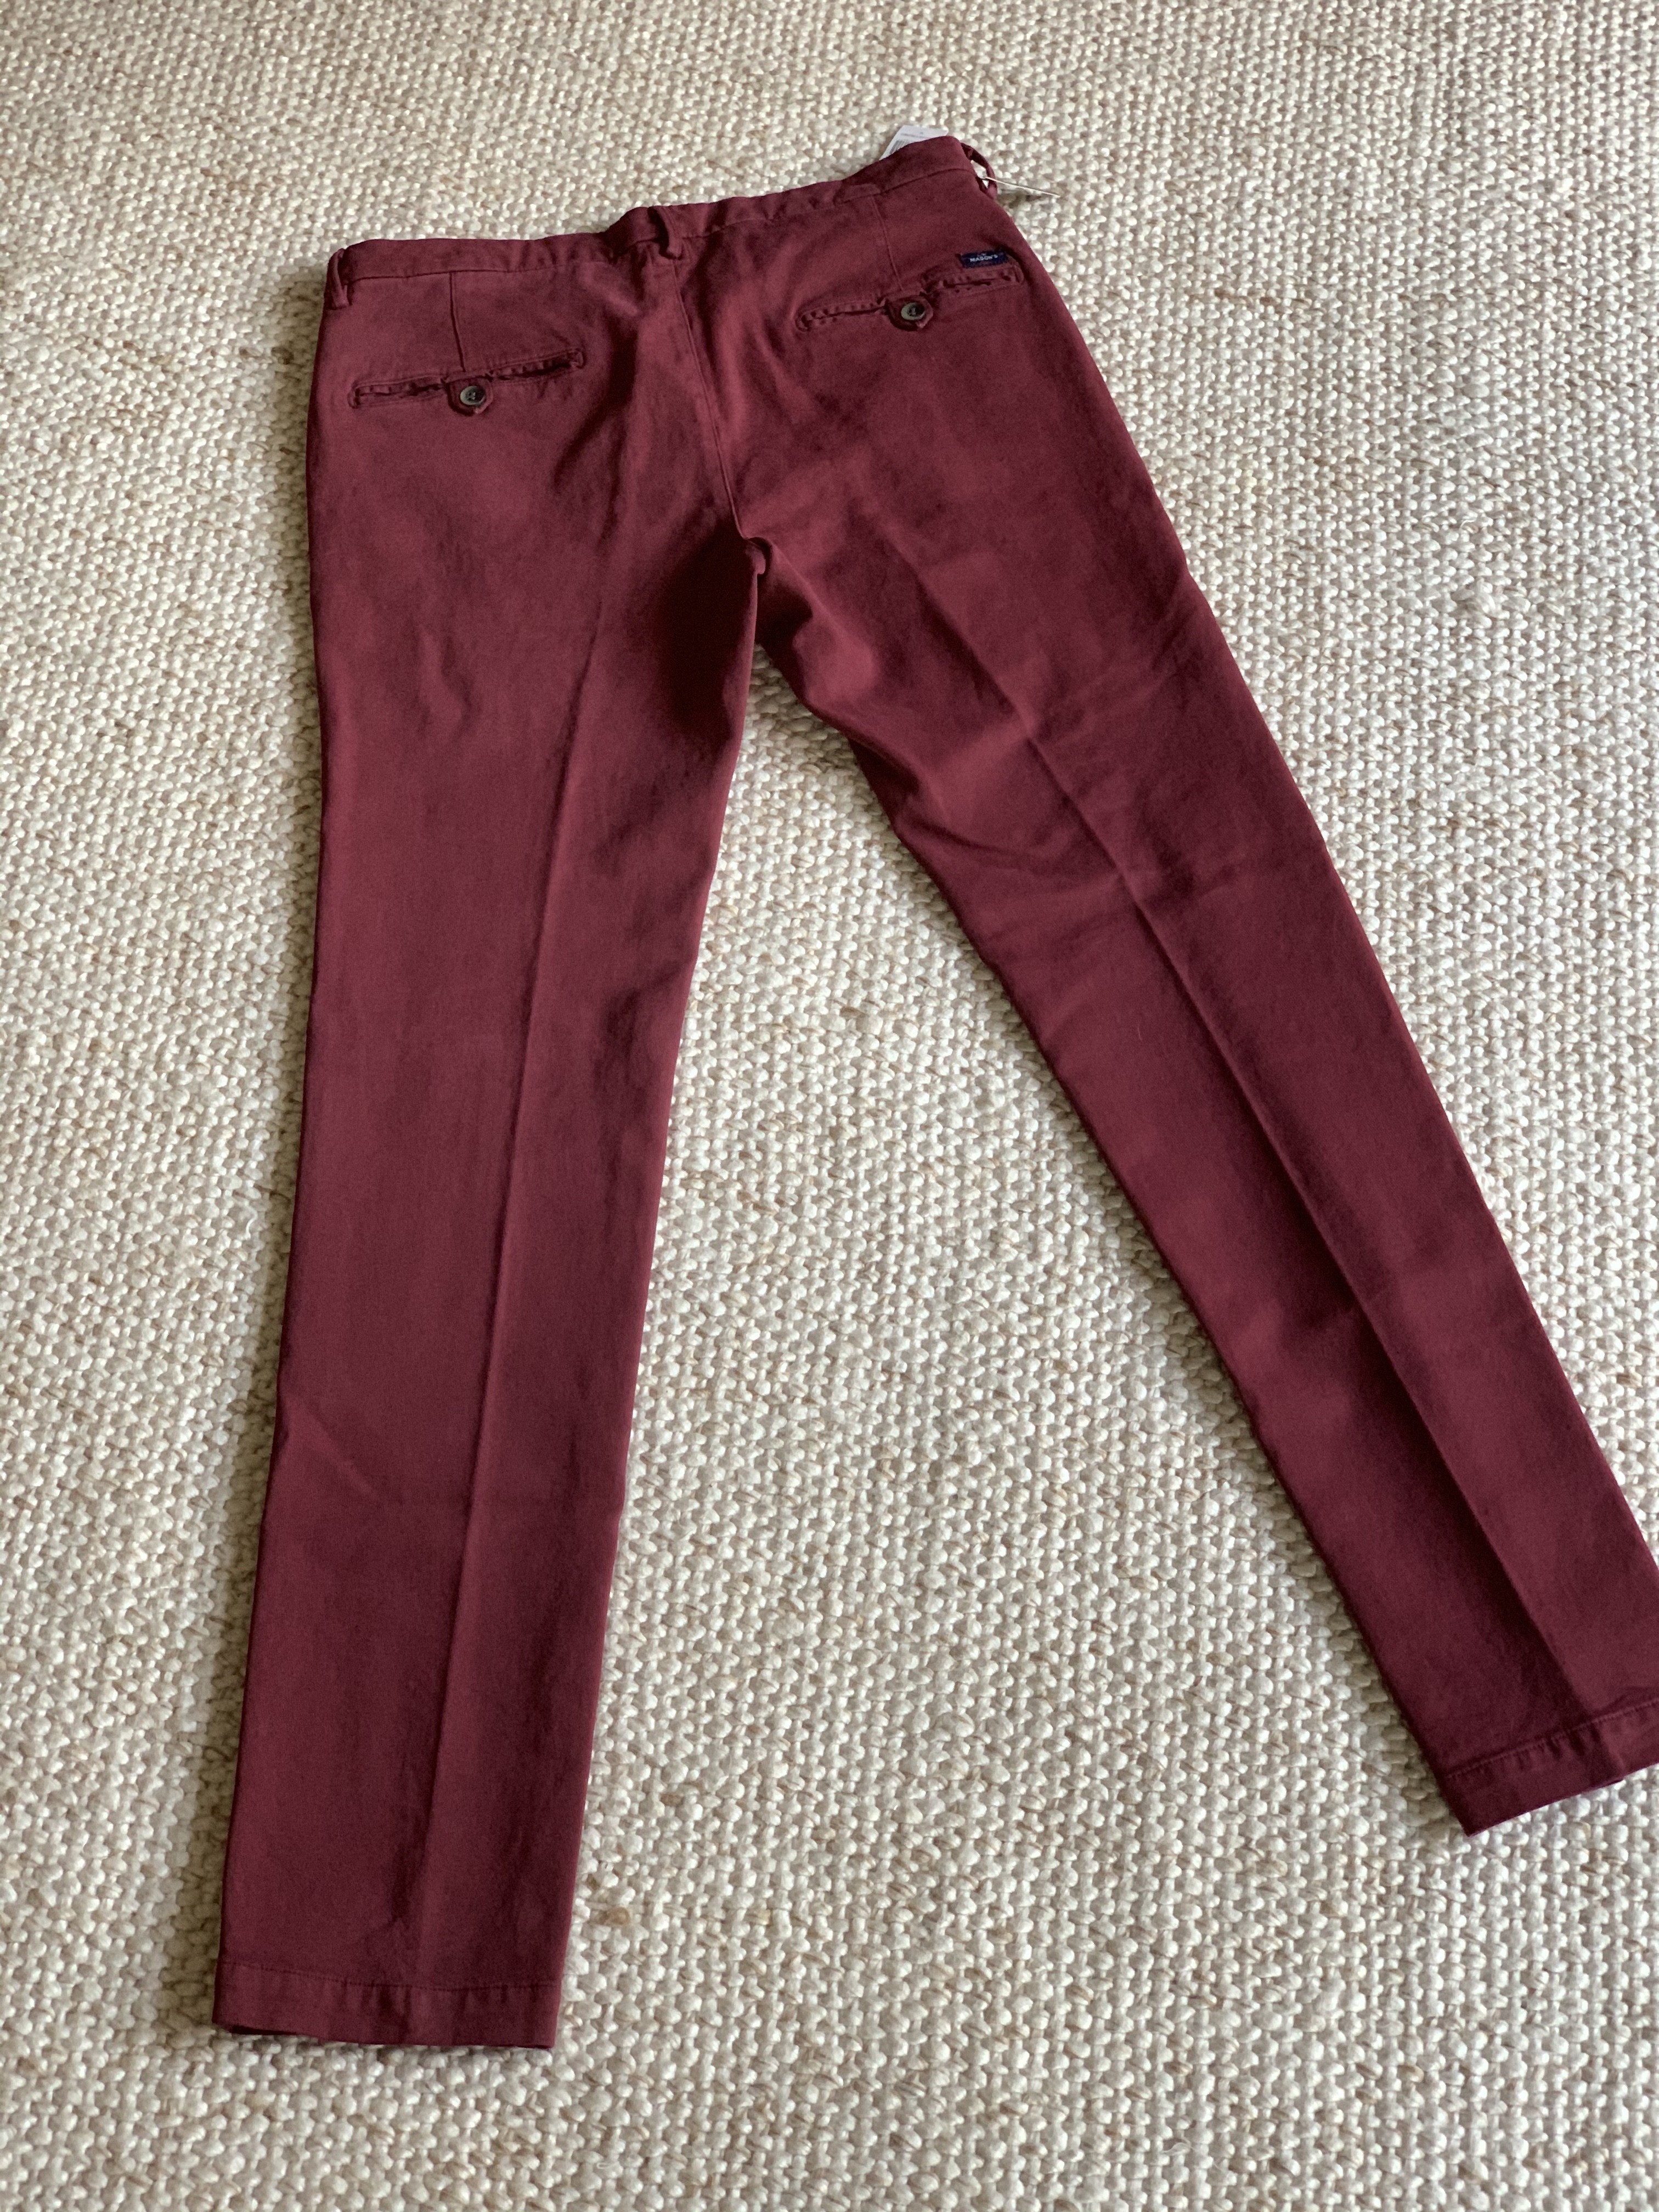 Masons - NWT $315.00 - Tricotine Jersey Slim-Fit Trousers - 2